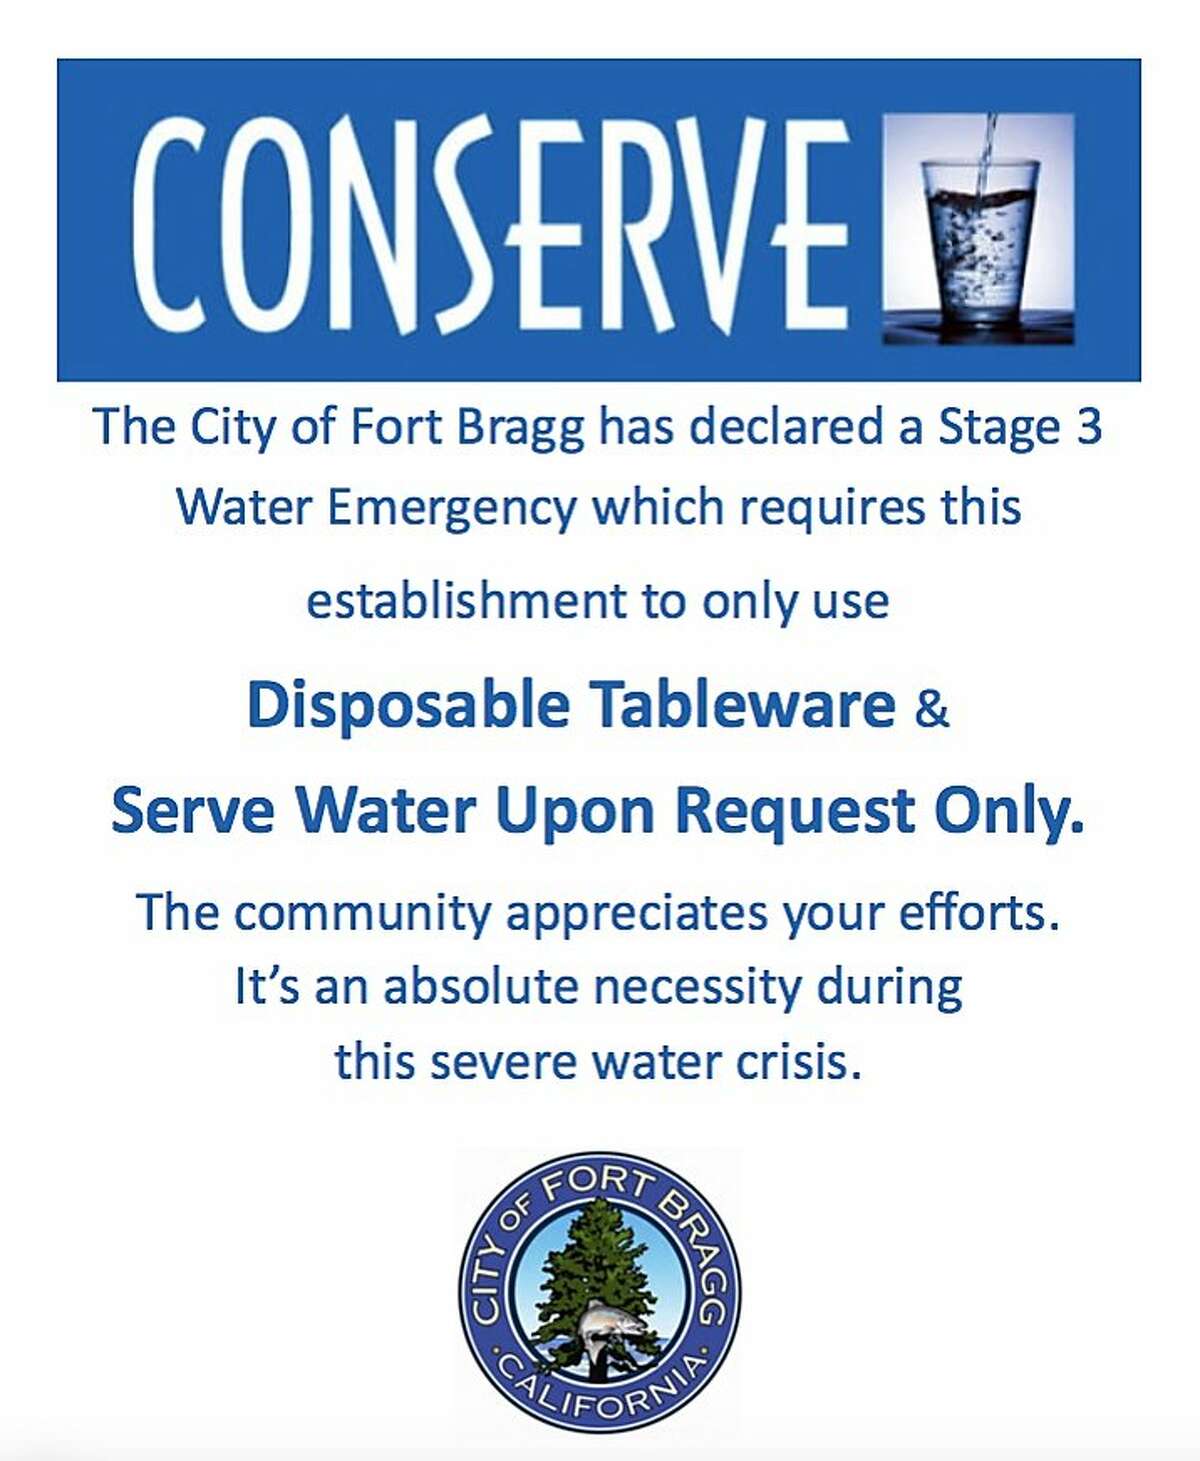 This sign was given to restaurants that have been ordered to use disposable plates and cups after Fort Bragg (Mendocino County) declared a Stage 3 water emergency in September 2015.